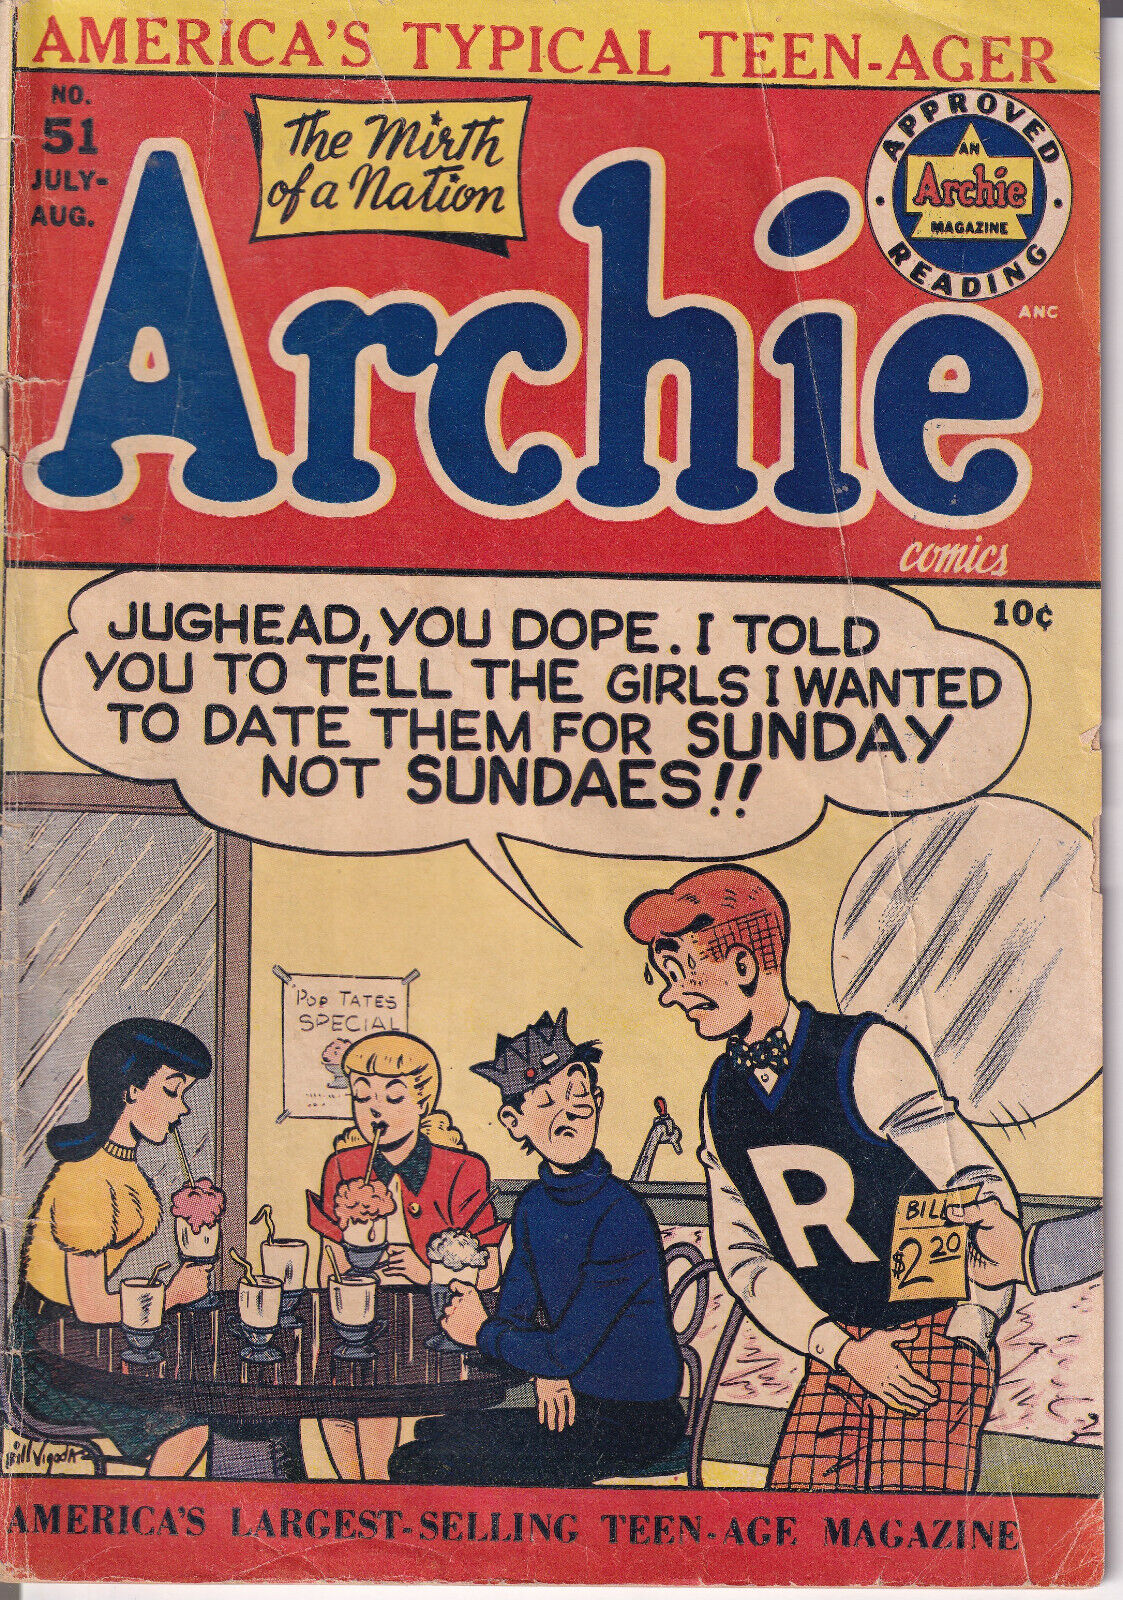 Archie #51  July  / Aug  1951  America\'s Typical Teen-Ager